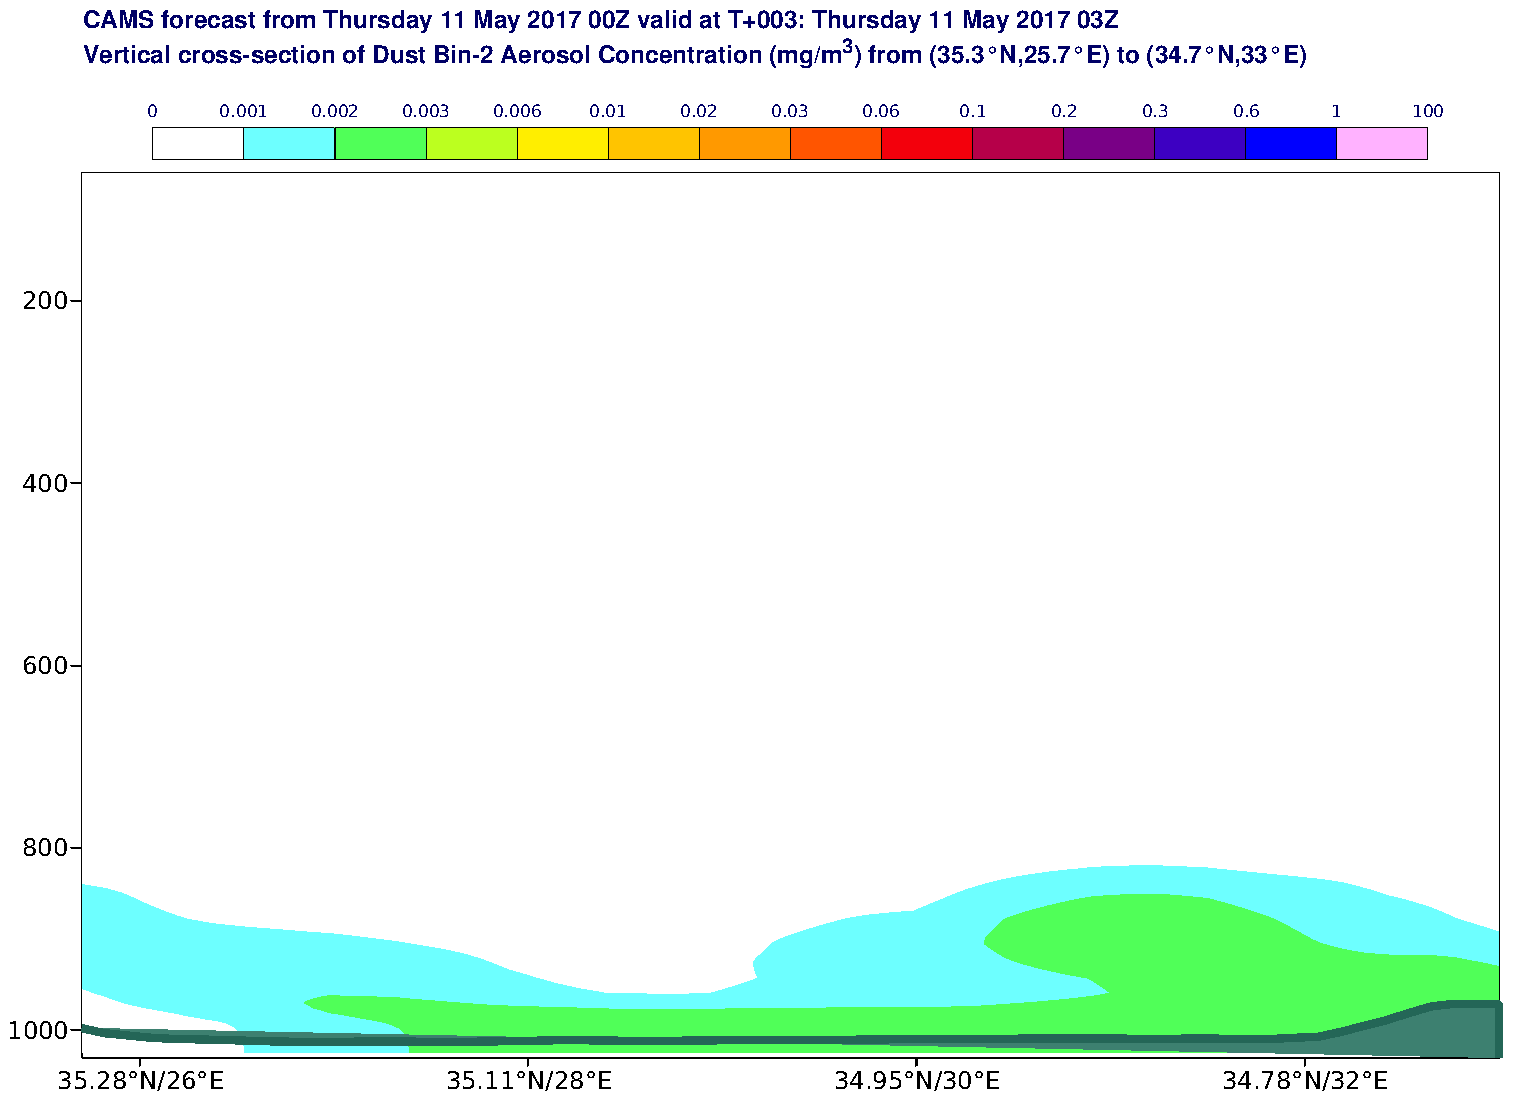 Vertical cross-section of Dust Bin-2 Aerosol Concentration (mg/m3) valid at T3 - 2017-05-11 03:00